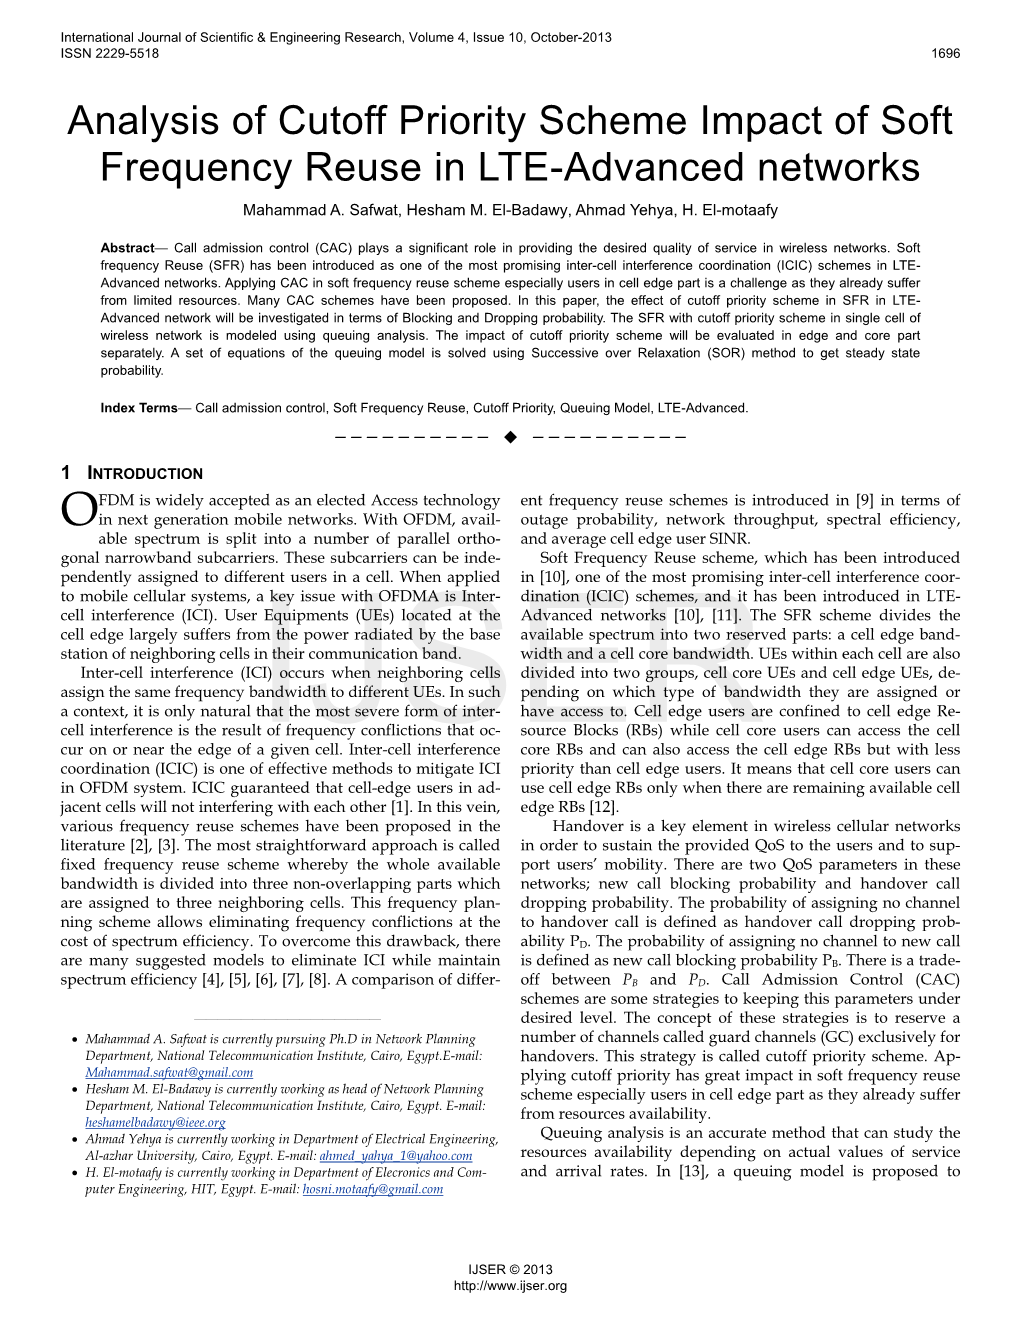 Analysis of Cutoff Priority Scheme Impact of Soft Frequency Reuse in LTE-Advanced Networks Mahammad A